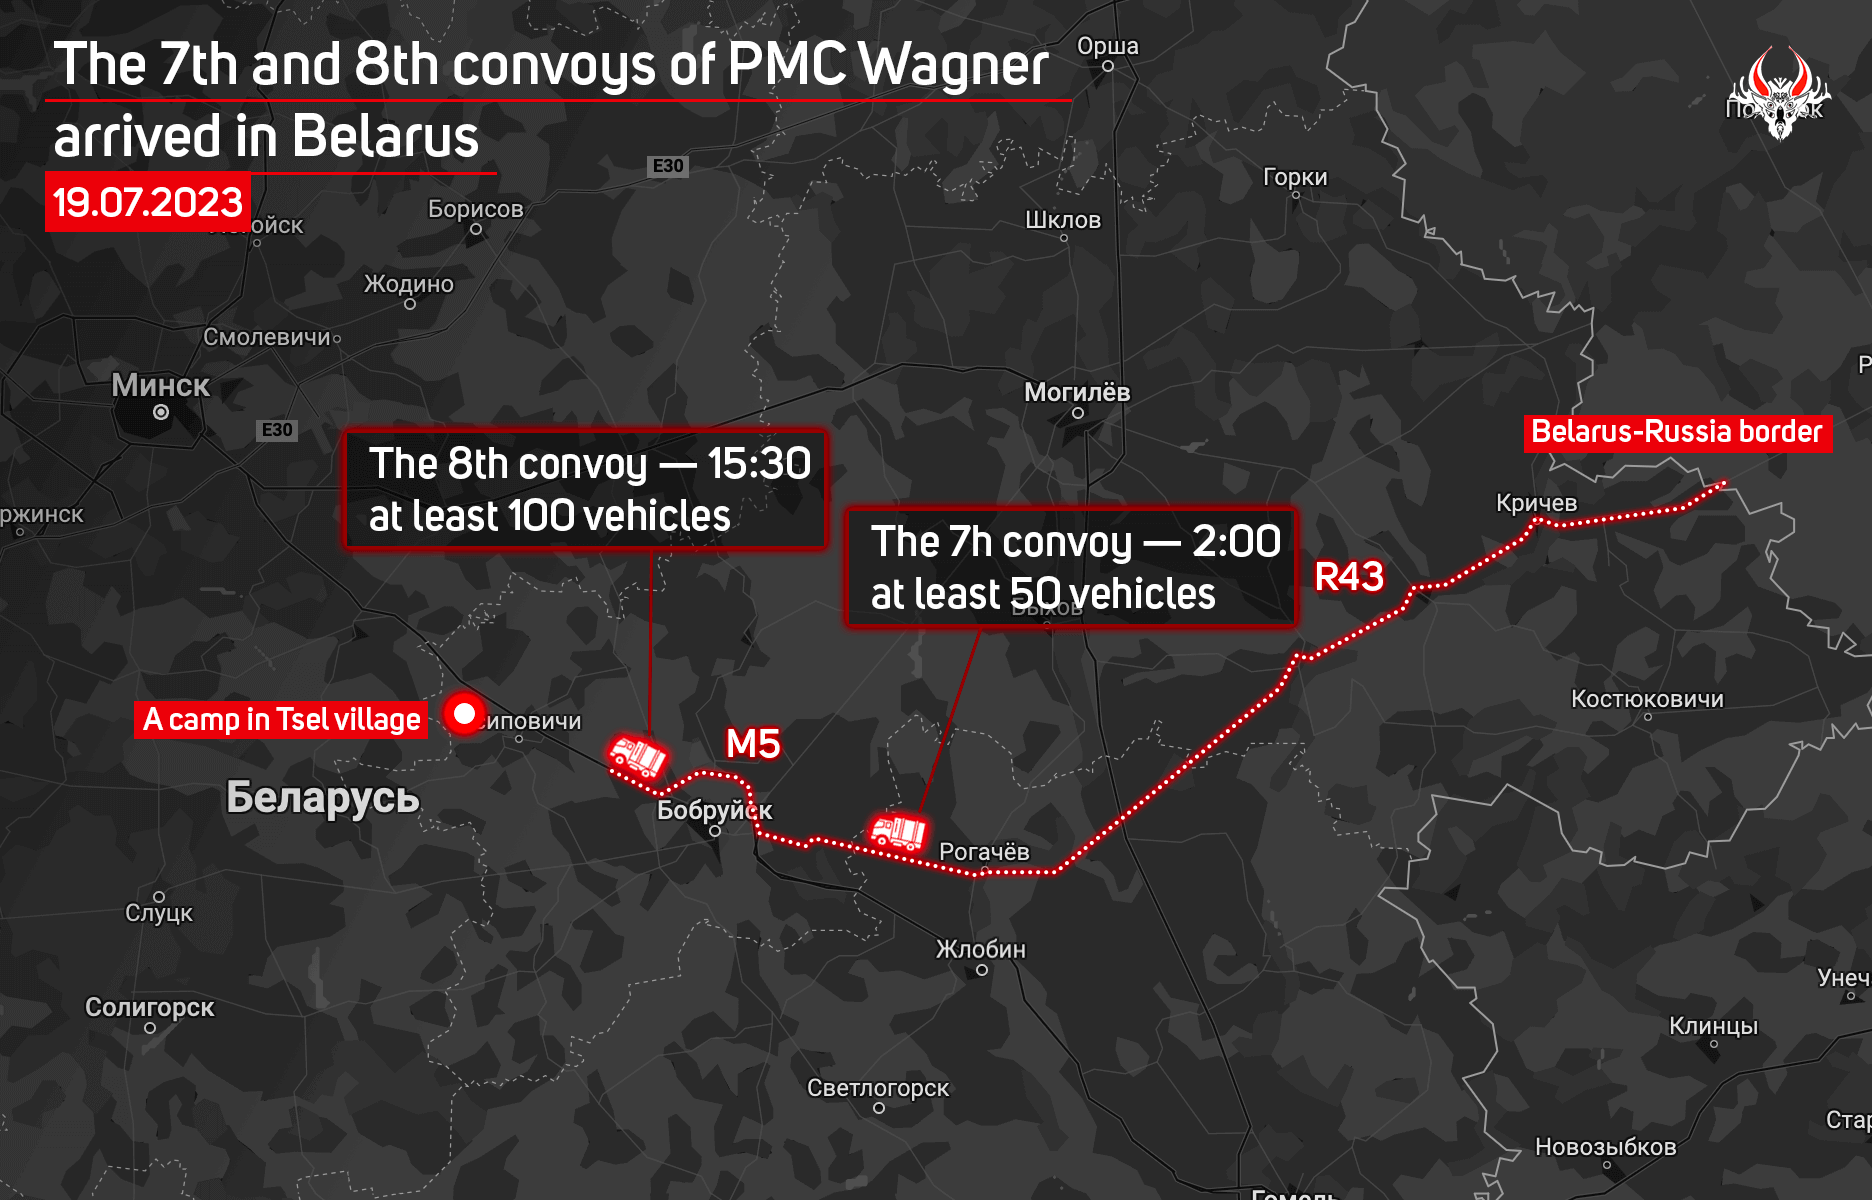 Two more convoys of PMC Wagner arrived in Belarus: at least 150 pieces of equipment